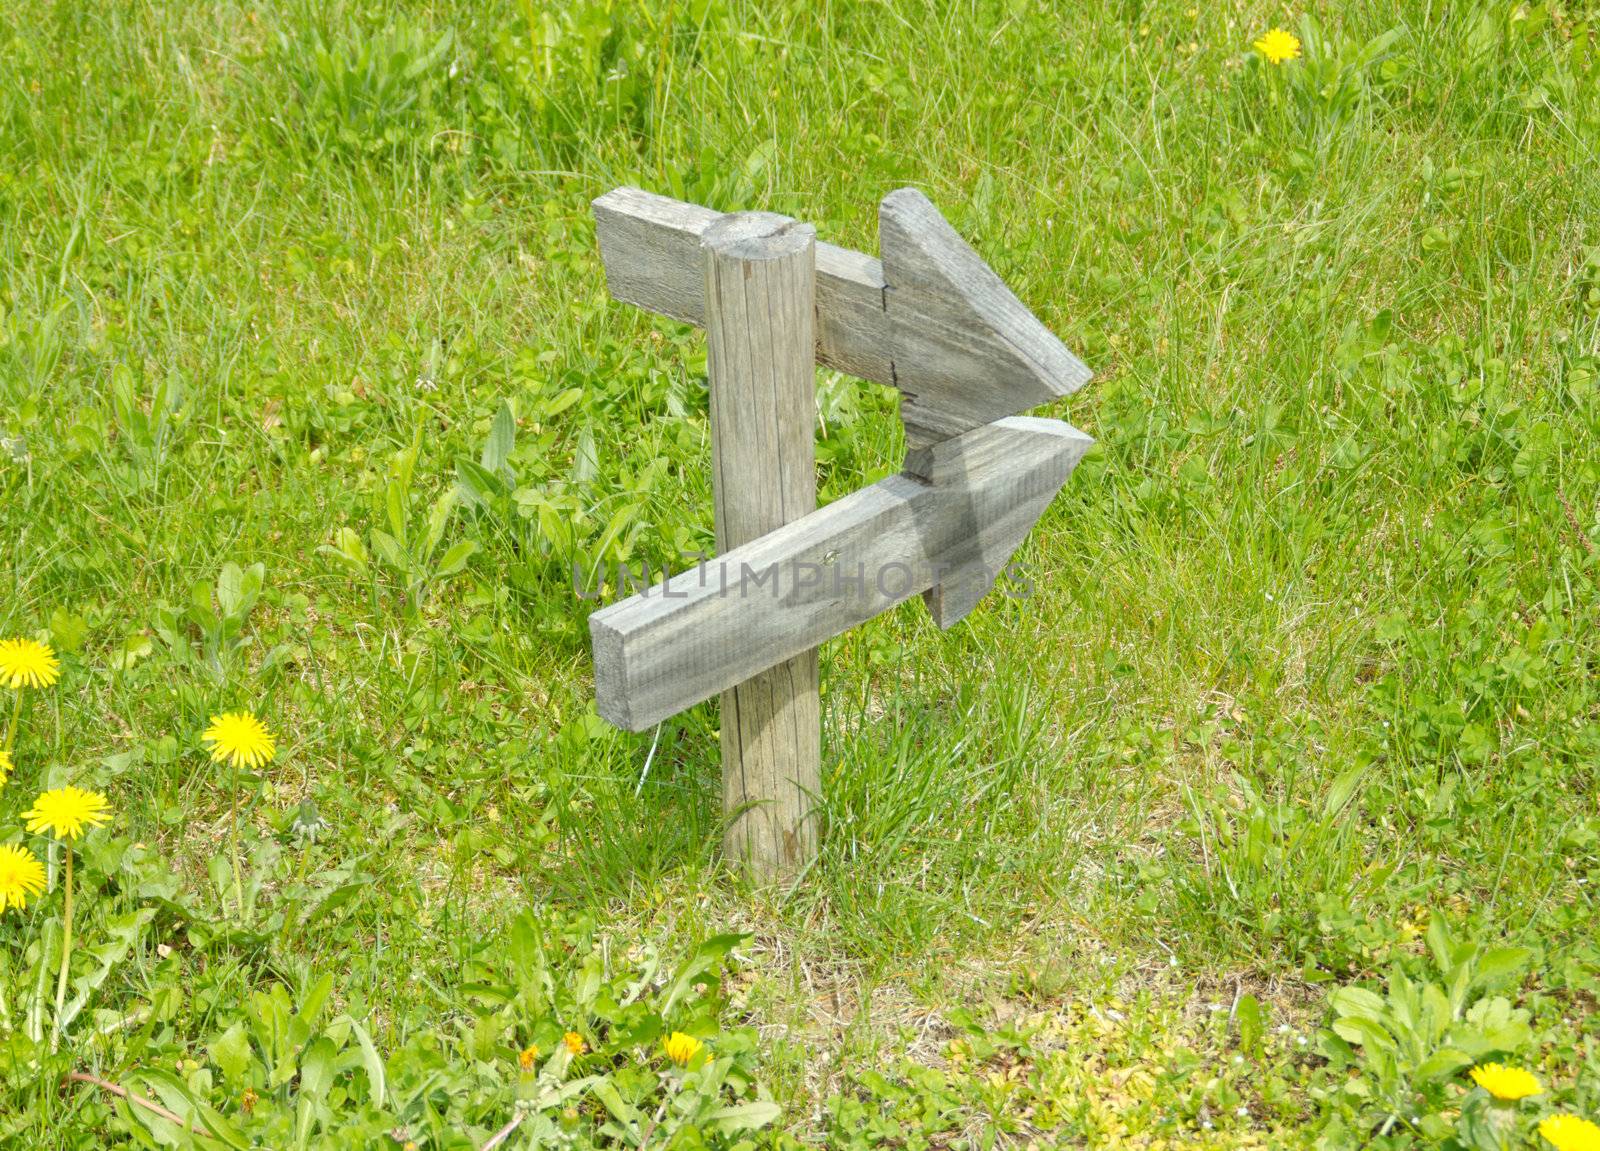 Wooden marker showing two routes